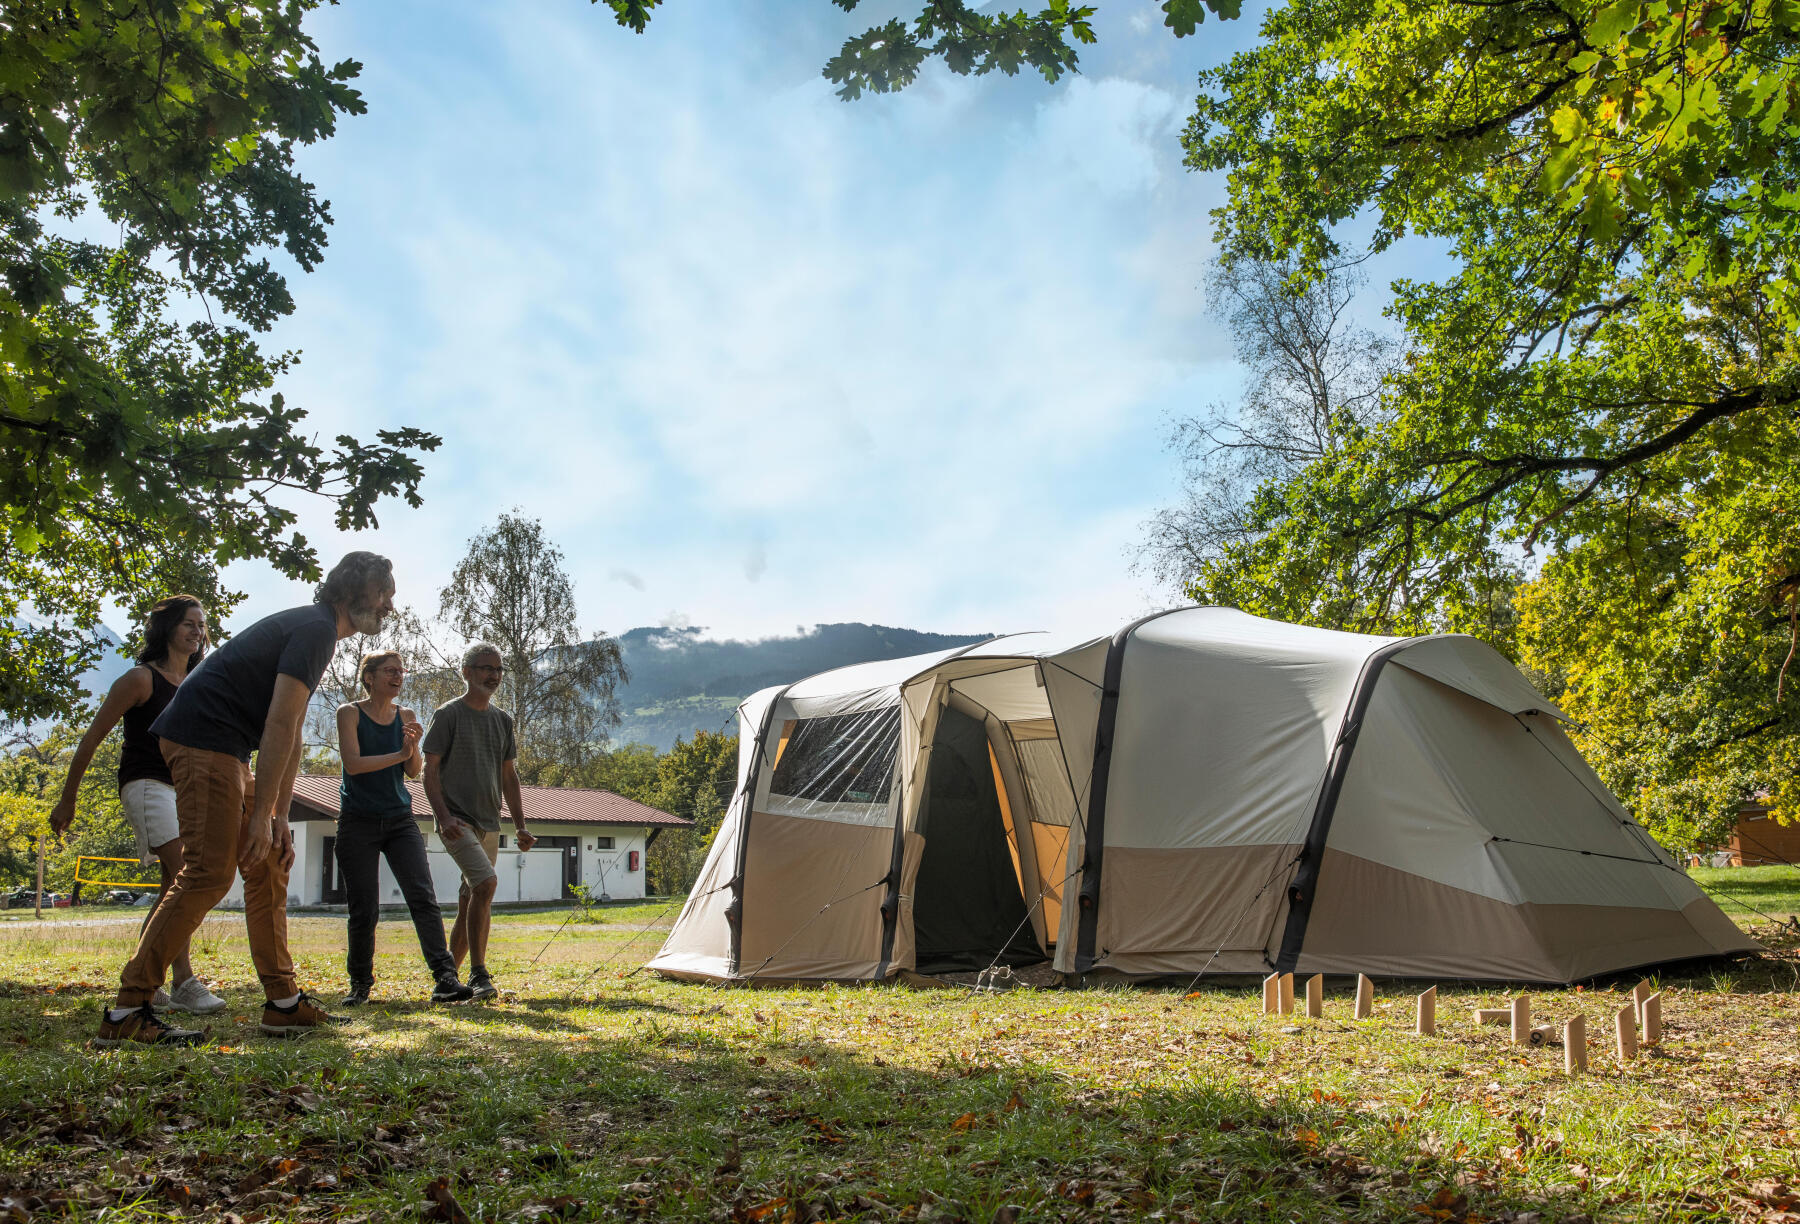 What type of tent should you choose for 4 people?